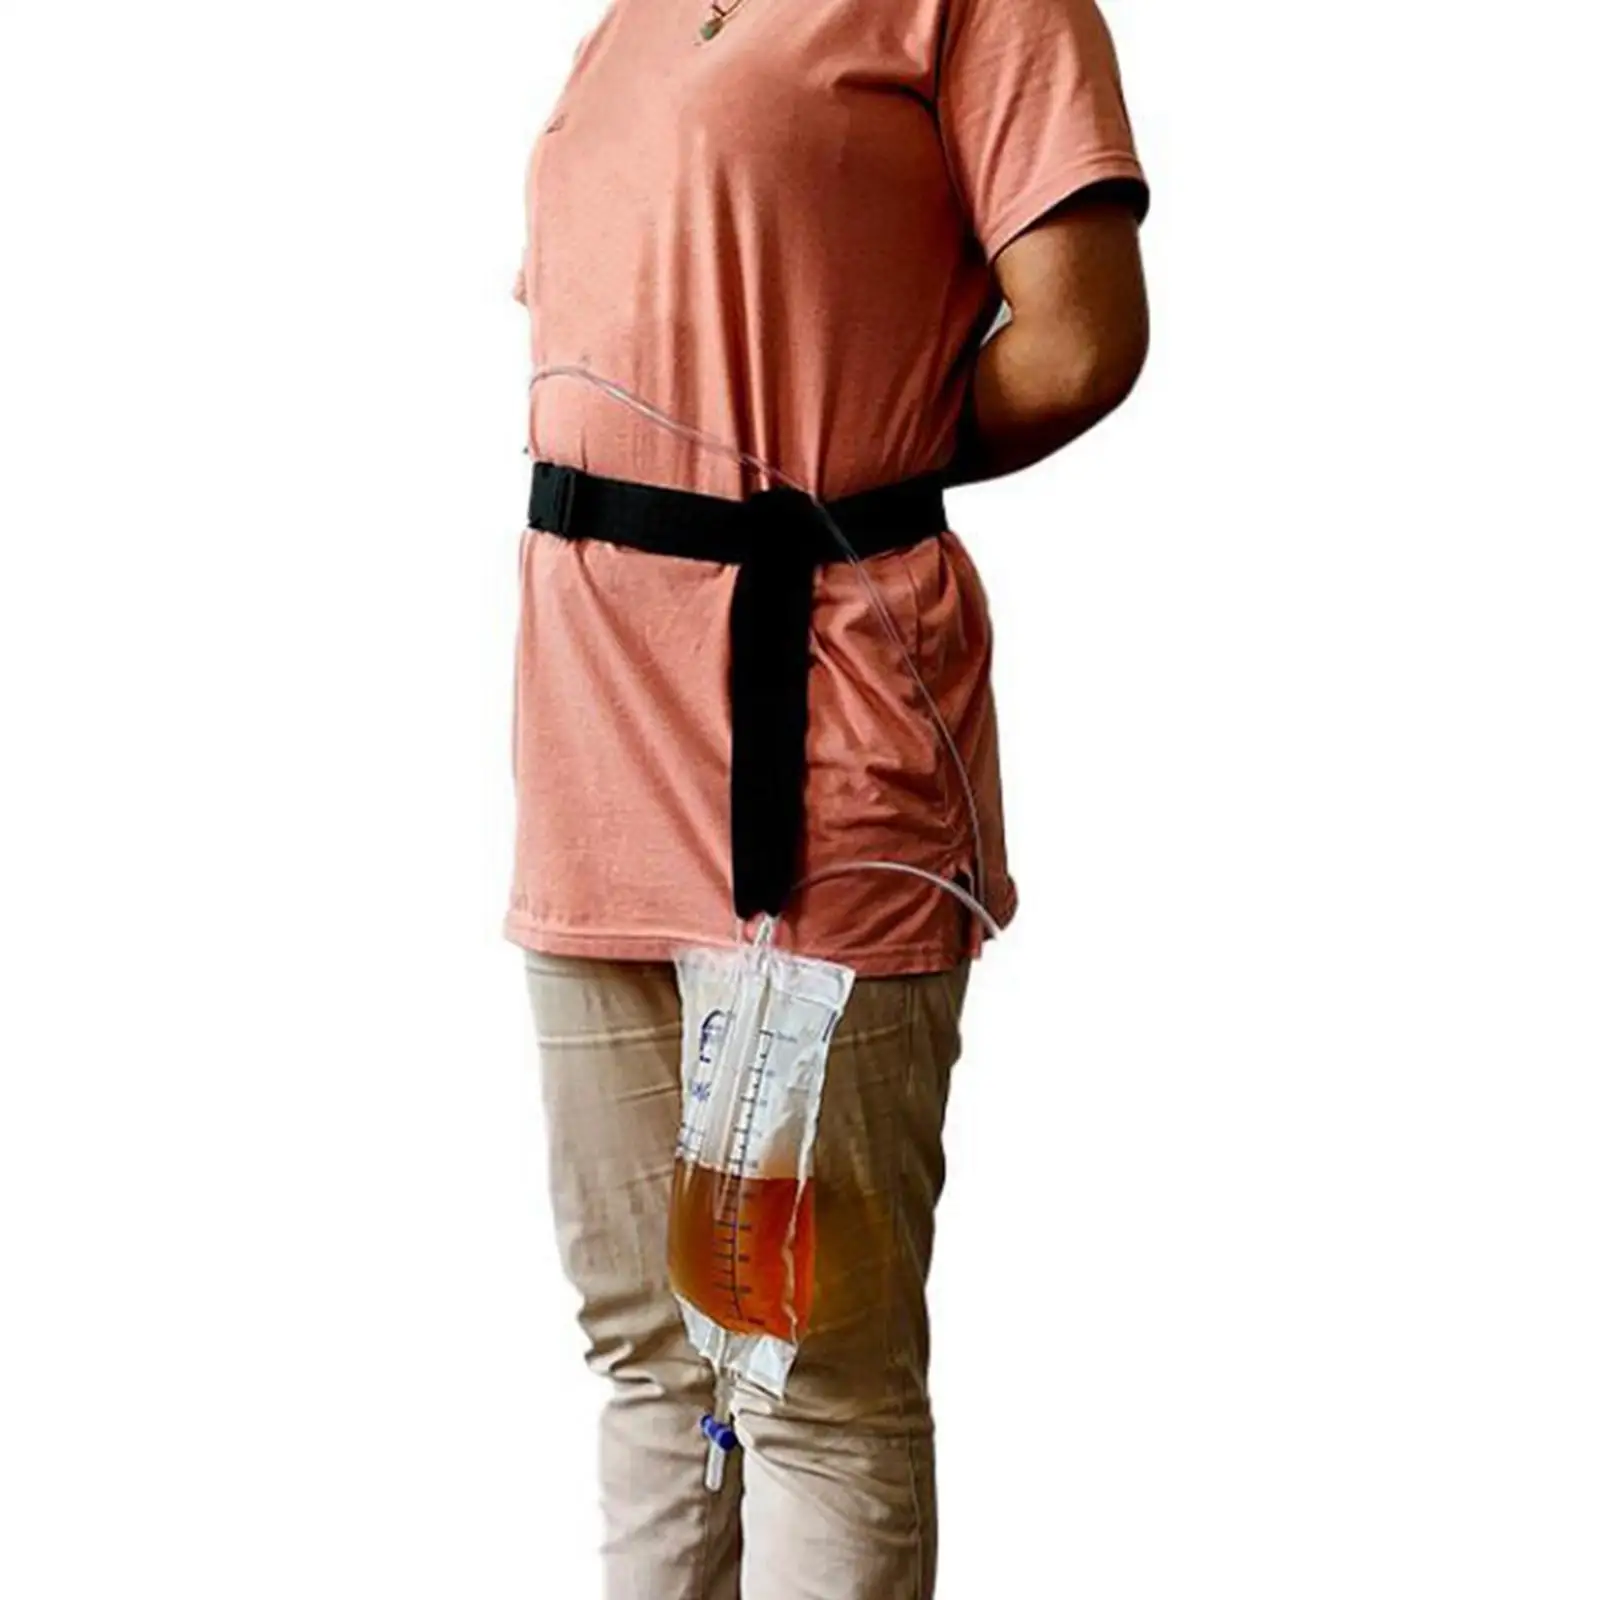 Drainage Bag Strap Adjustable Drainage Urinary Drainage bag Band Holder for Men/Women Home/Outdoor